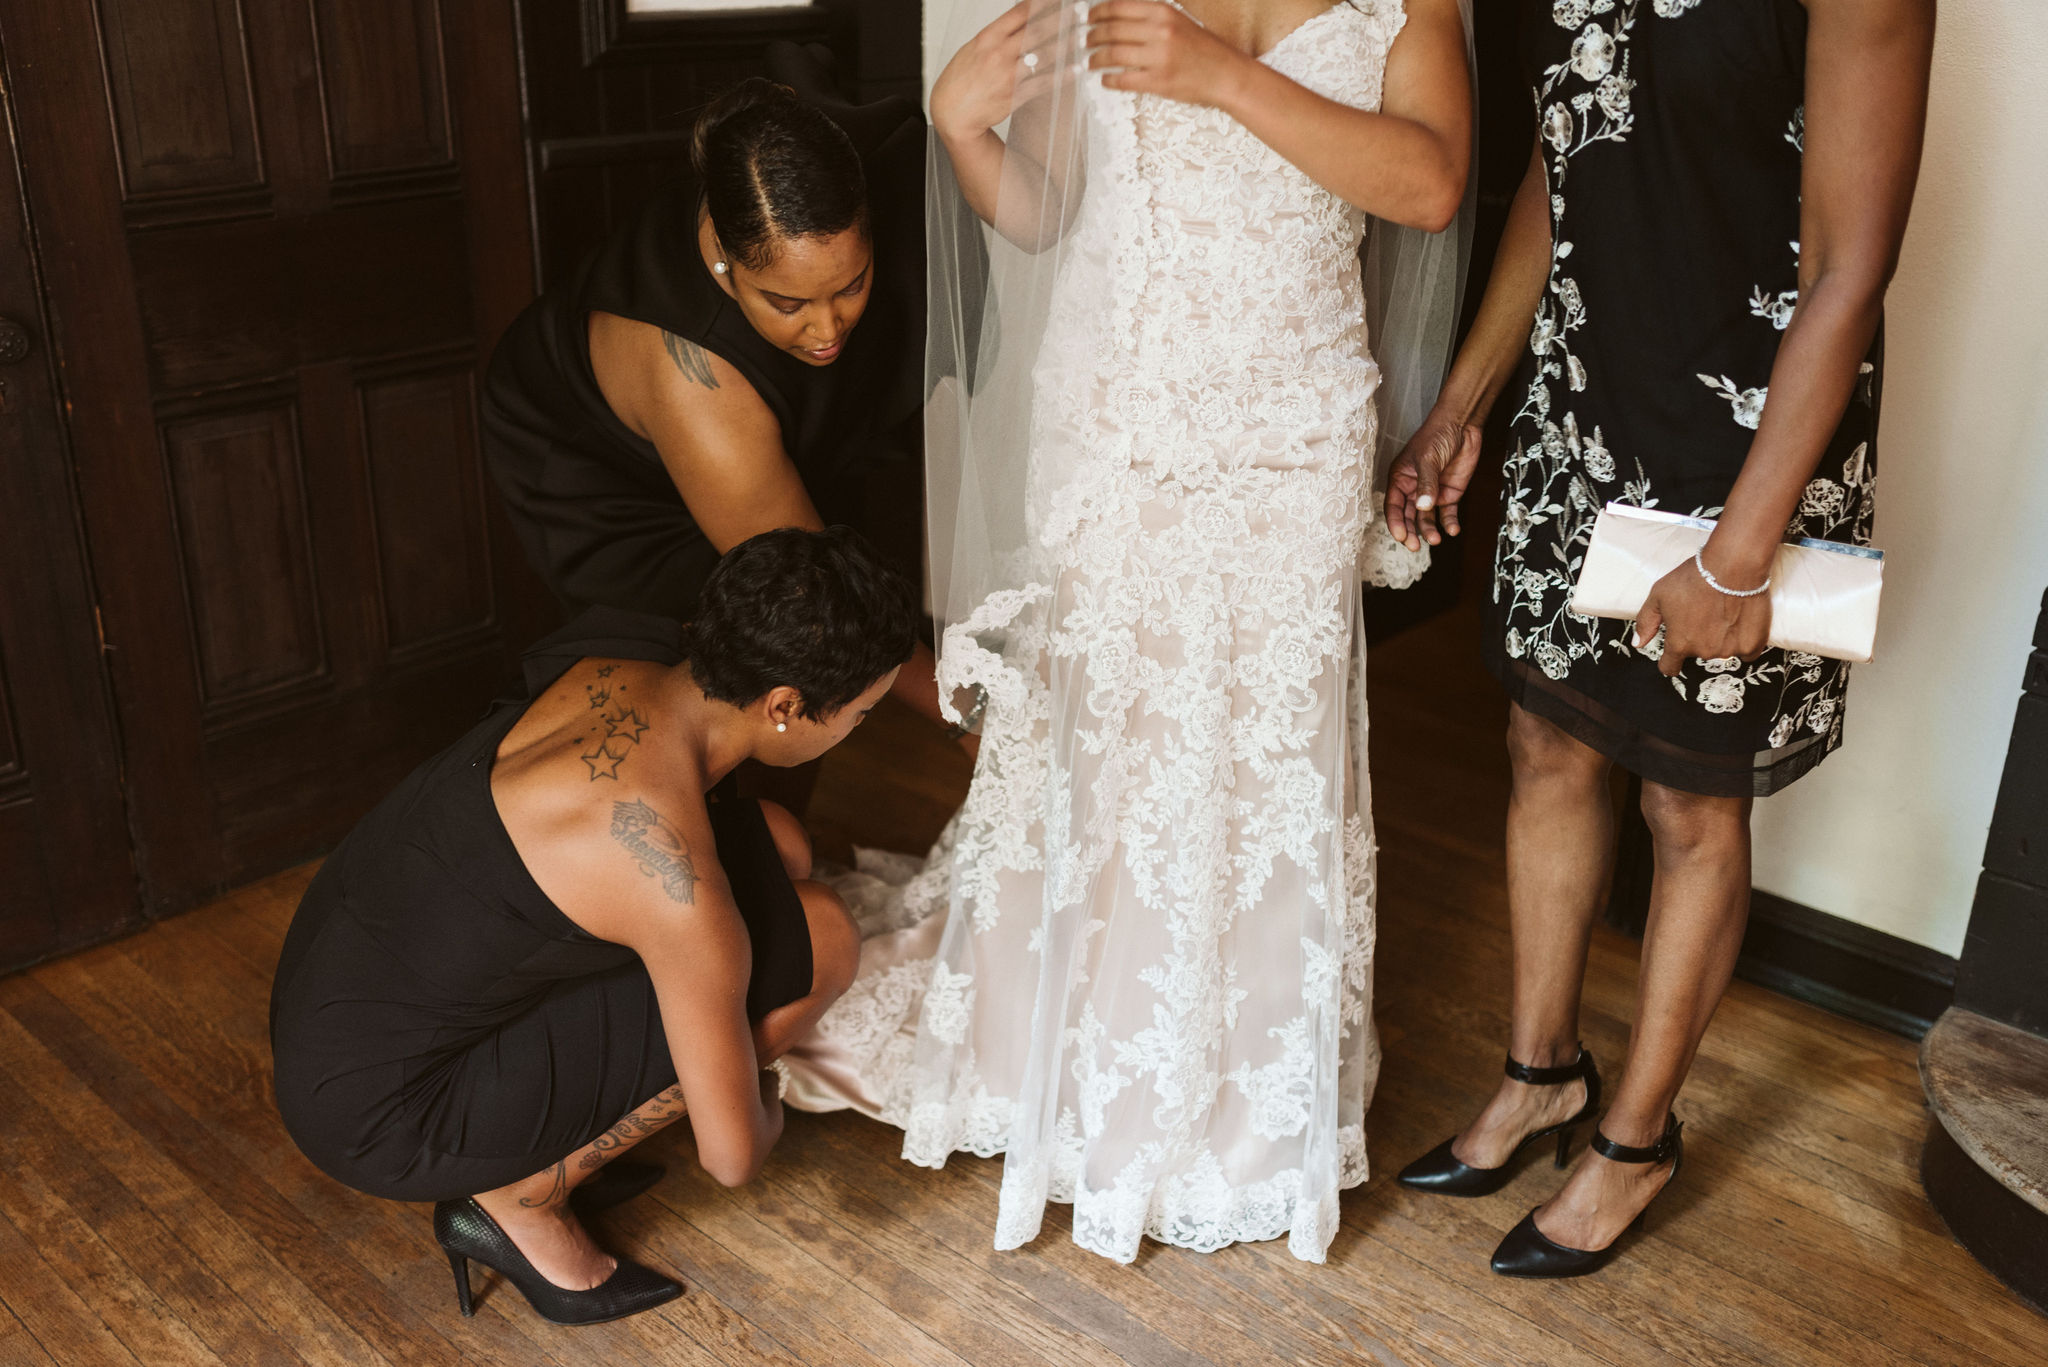  Baltimore, Maryland Wedding Photographer, Mount Vernon, Chase Court, Classic, Outdoor Ceremony, Garden, Romantic, Bridesmaids Helping Bride get Ready, Lace Wedding Dress 